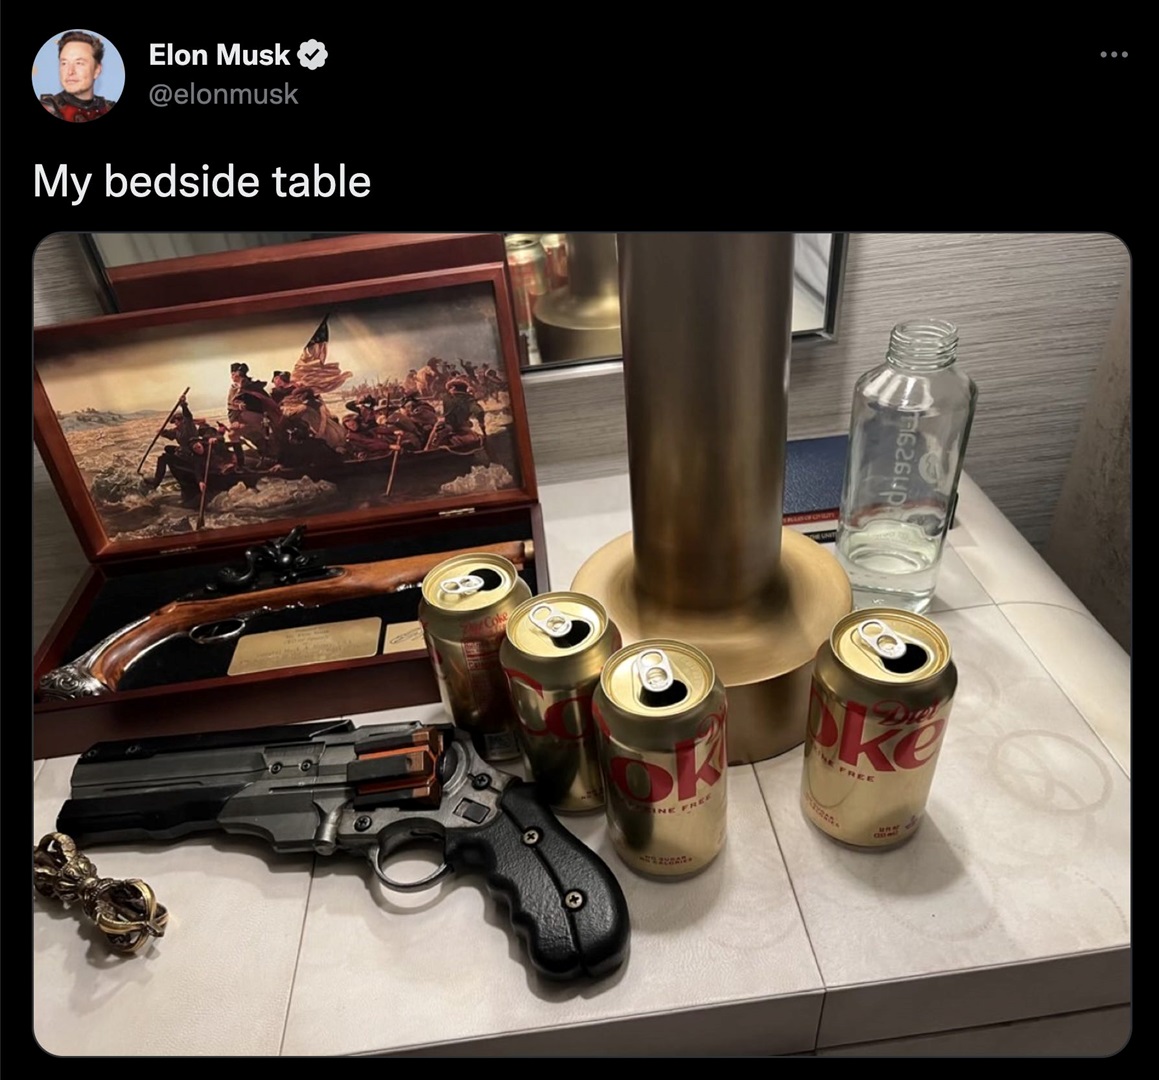 Everything in Elon Musk's bedside table photo, including what appears to be replica guns, Buddhist object | Business Insider